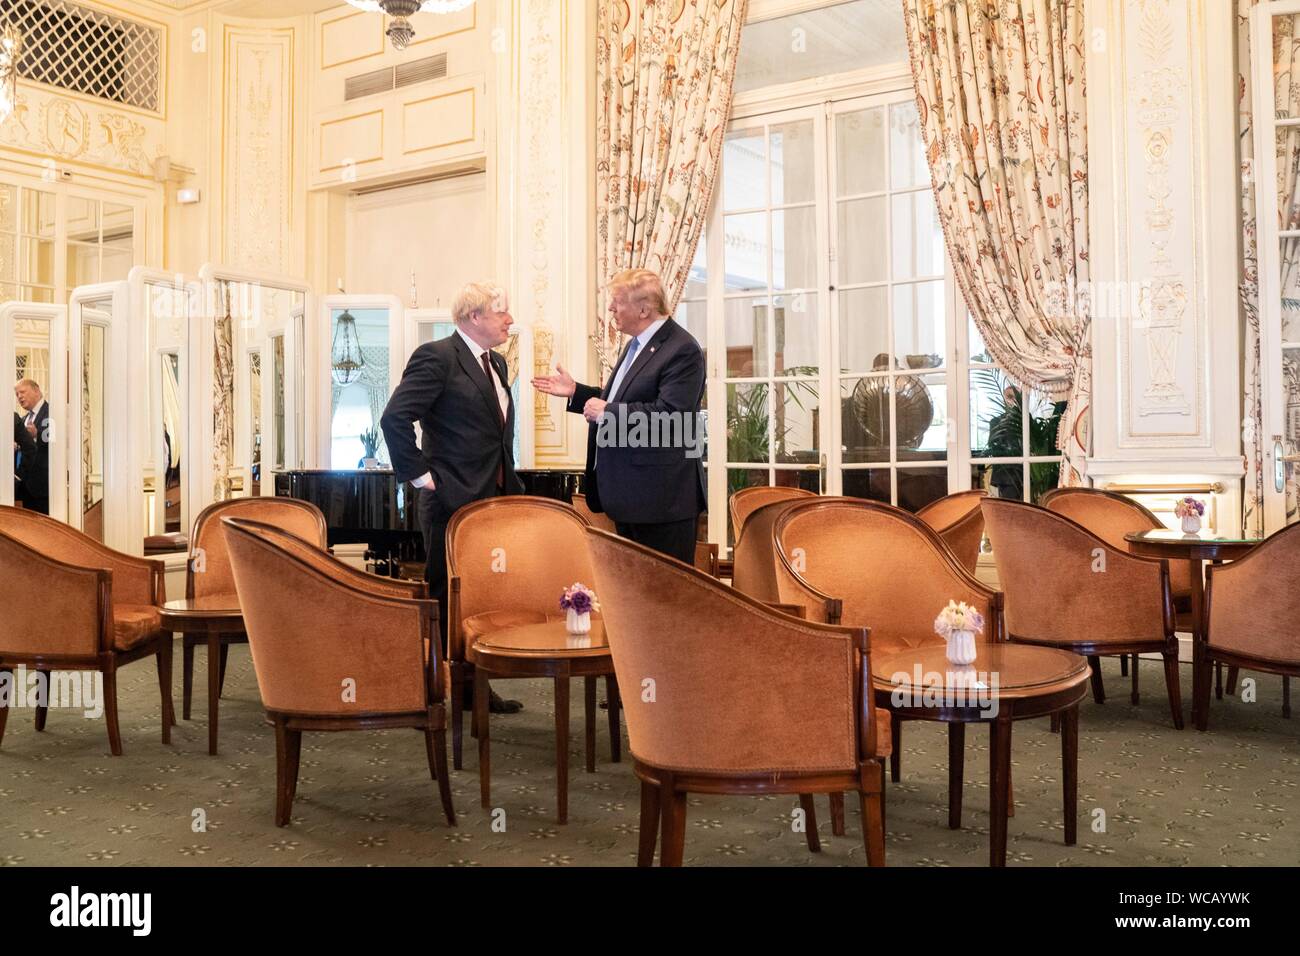 U.S. President Donald Trump, right, chats with British Prime Minister Boris Johnson following their meeting on the sidelines of the G7 Summit at the Hotel du Palais Biarritz August 25, 2019 in Biarritz, France. Stock Photo